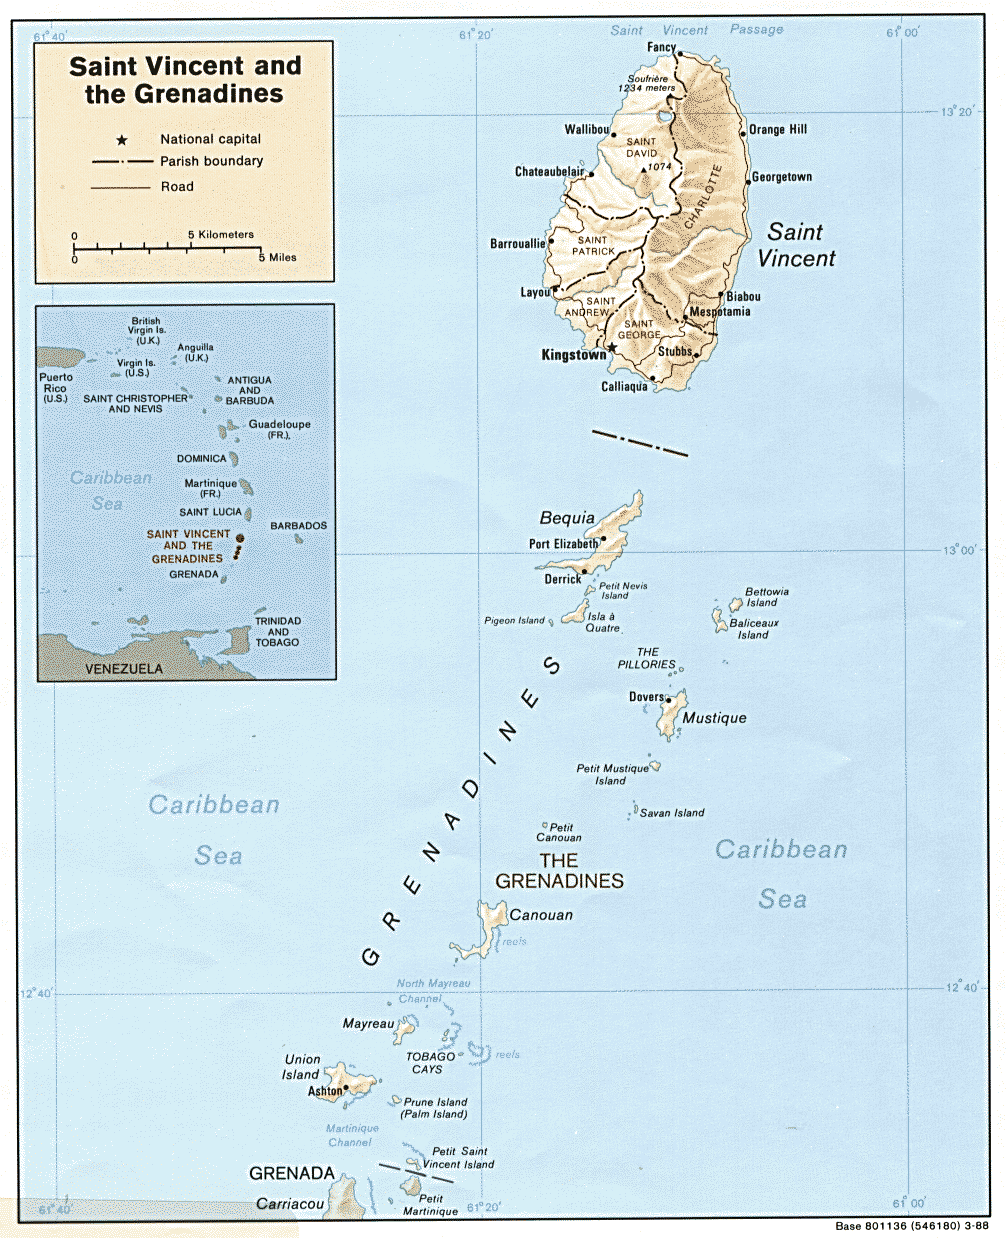 Map of St. Vincent and the Grenadines, 1988